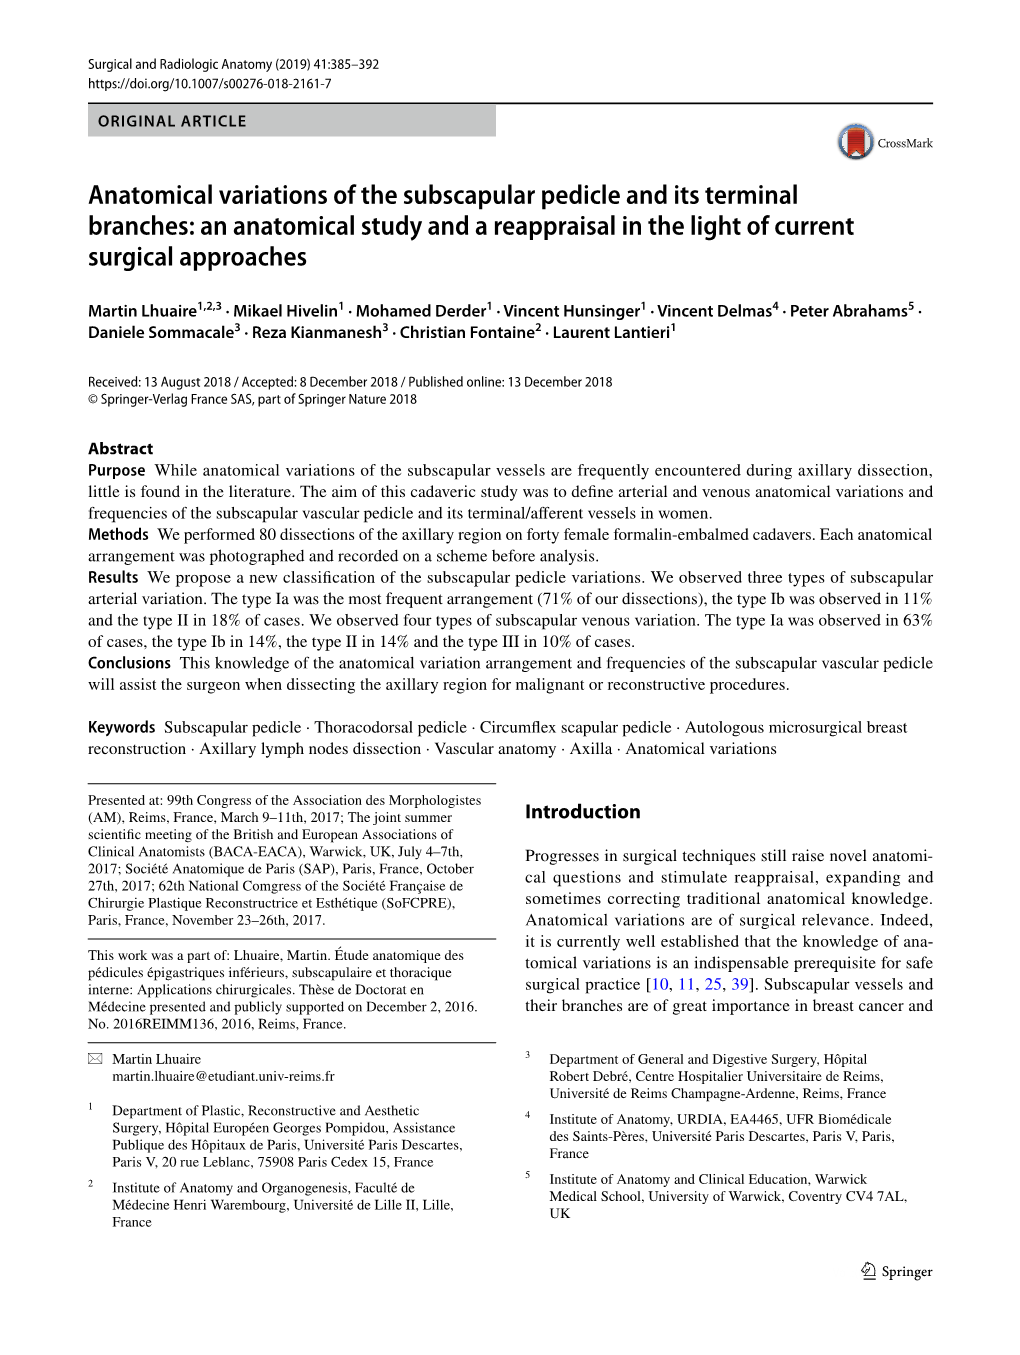 Anatomical Variations of the Subscapular Pedicle and Its Terminal Branches: an Anatomical Study and a Reappraisal in the Light of Current Surgical Approaches